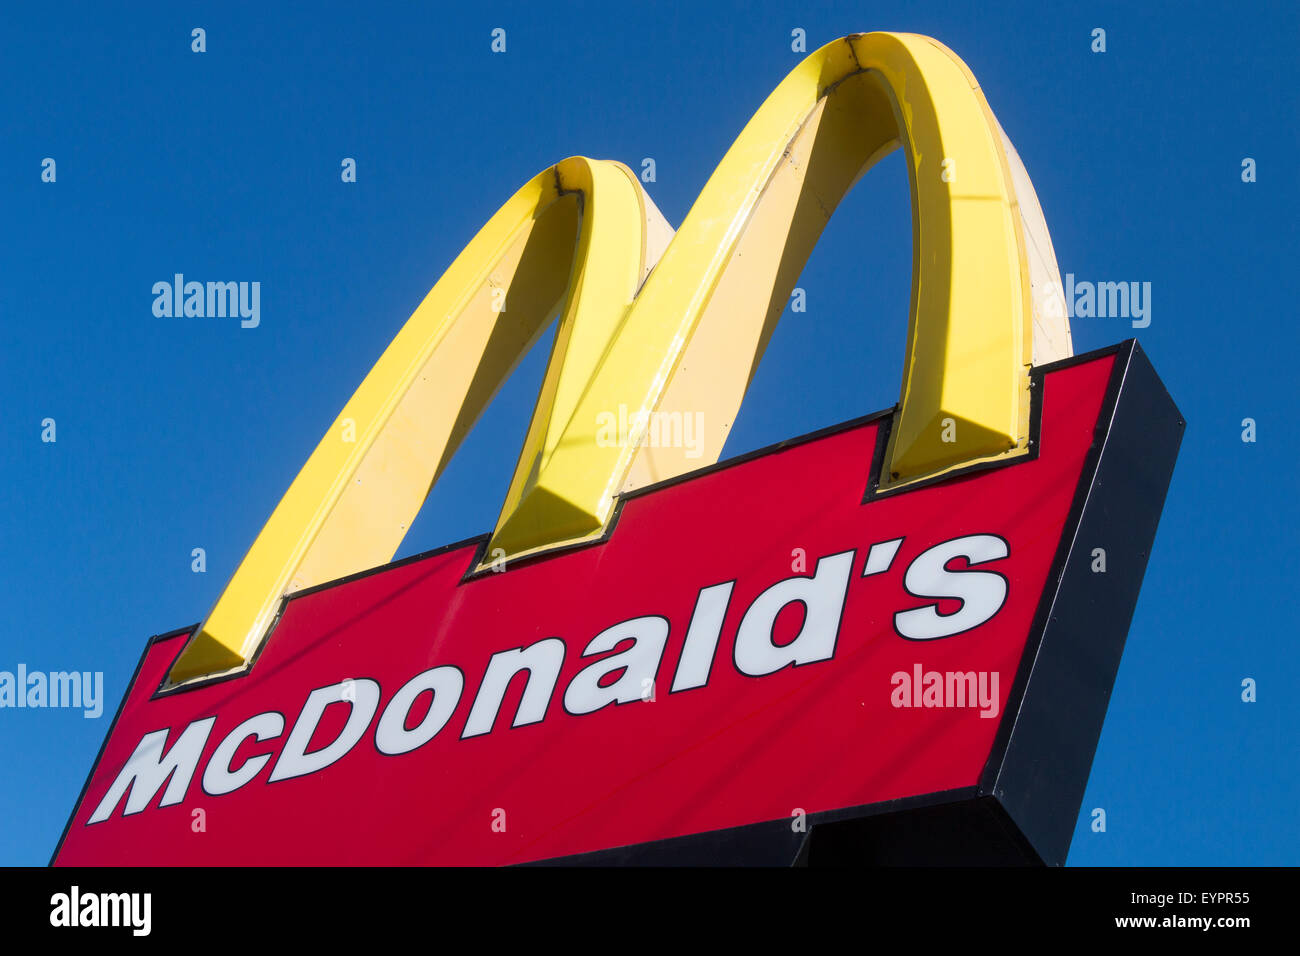 Mcdonalds famous sign and logo against a deep blue winter sky in Sydney,australia Stock Photo